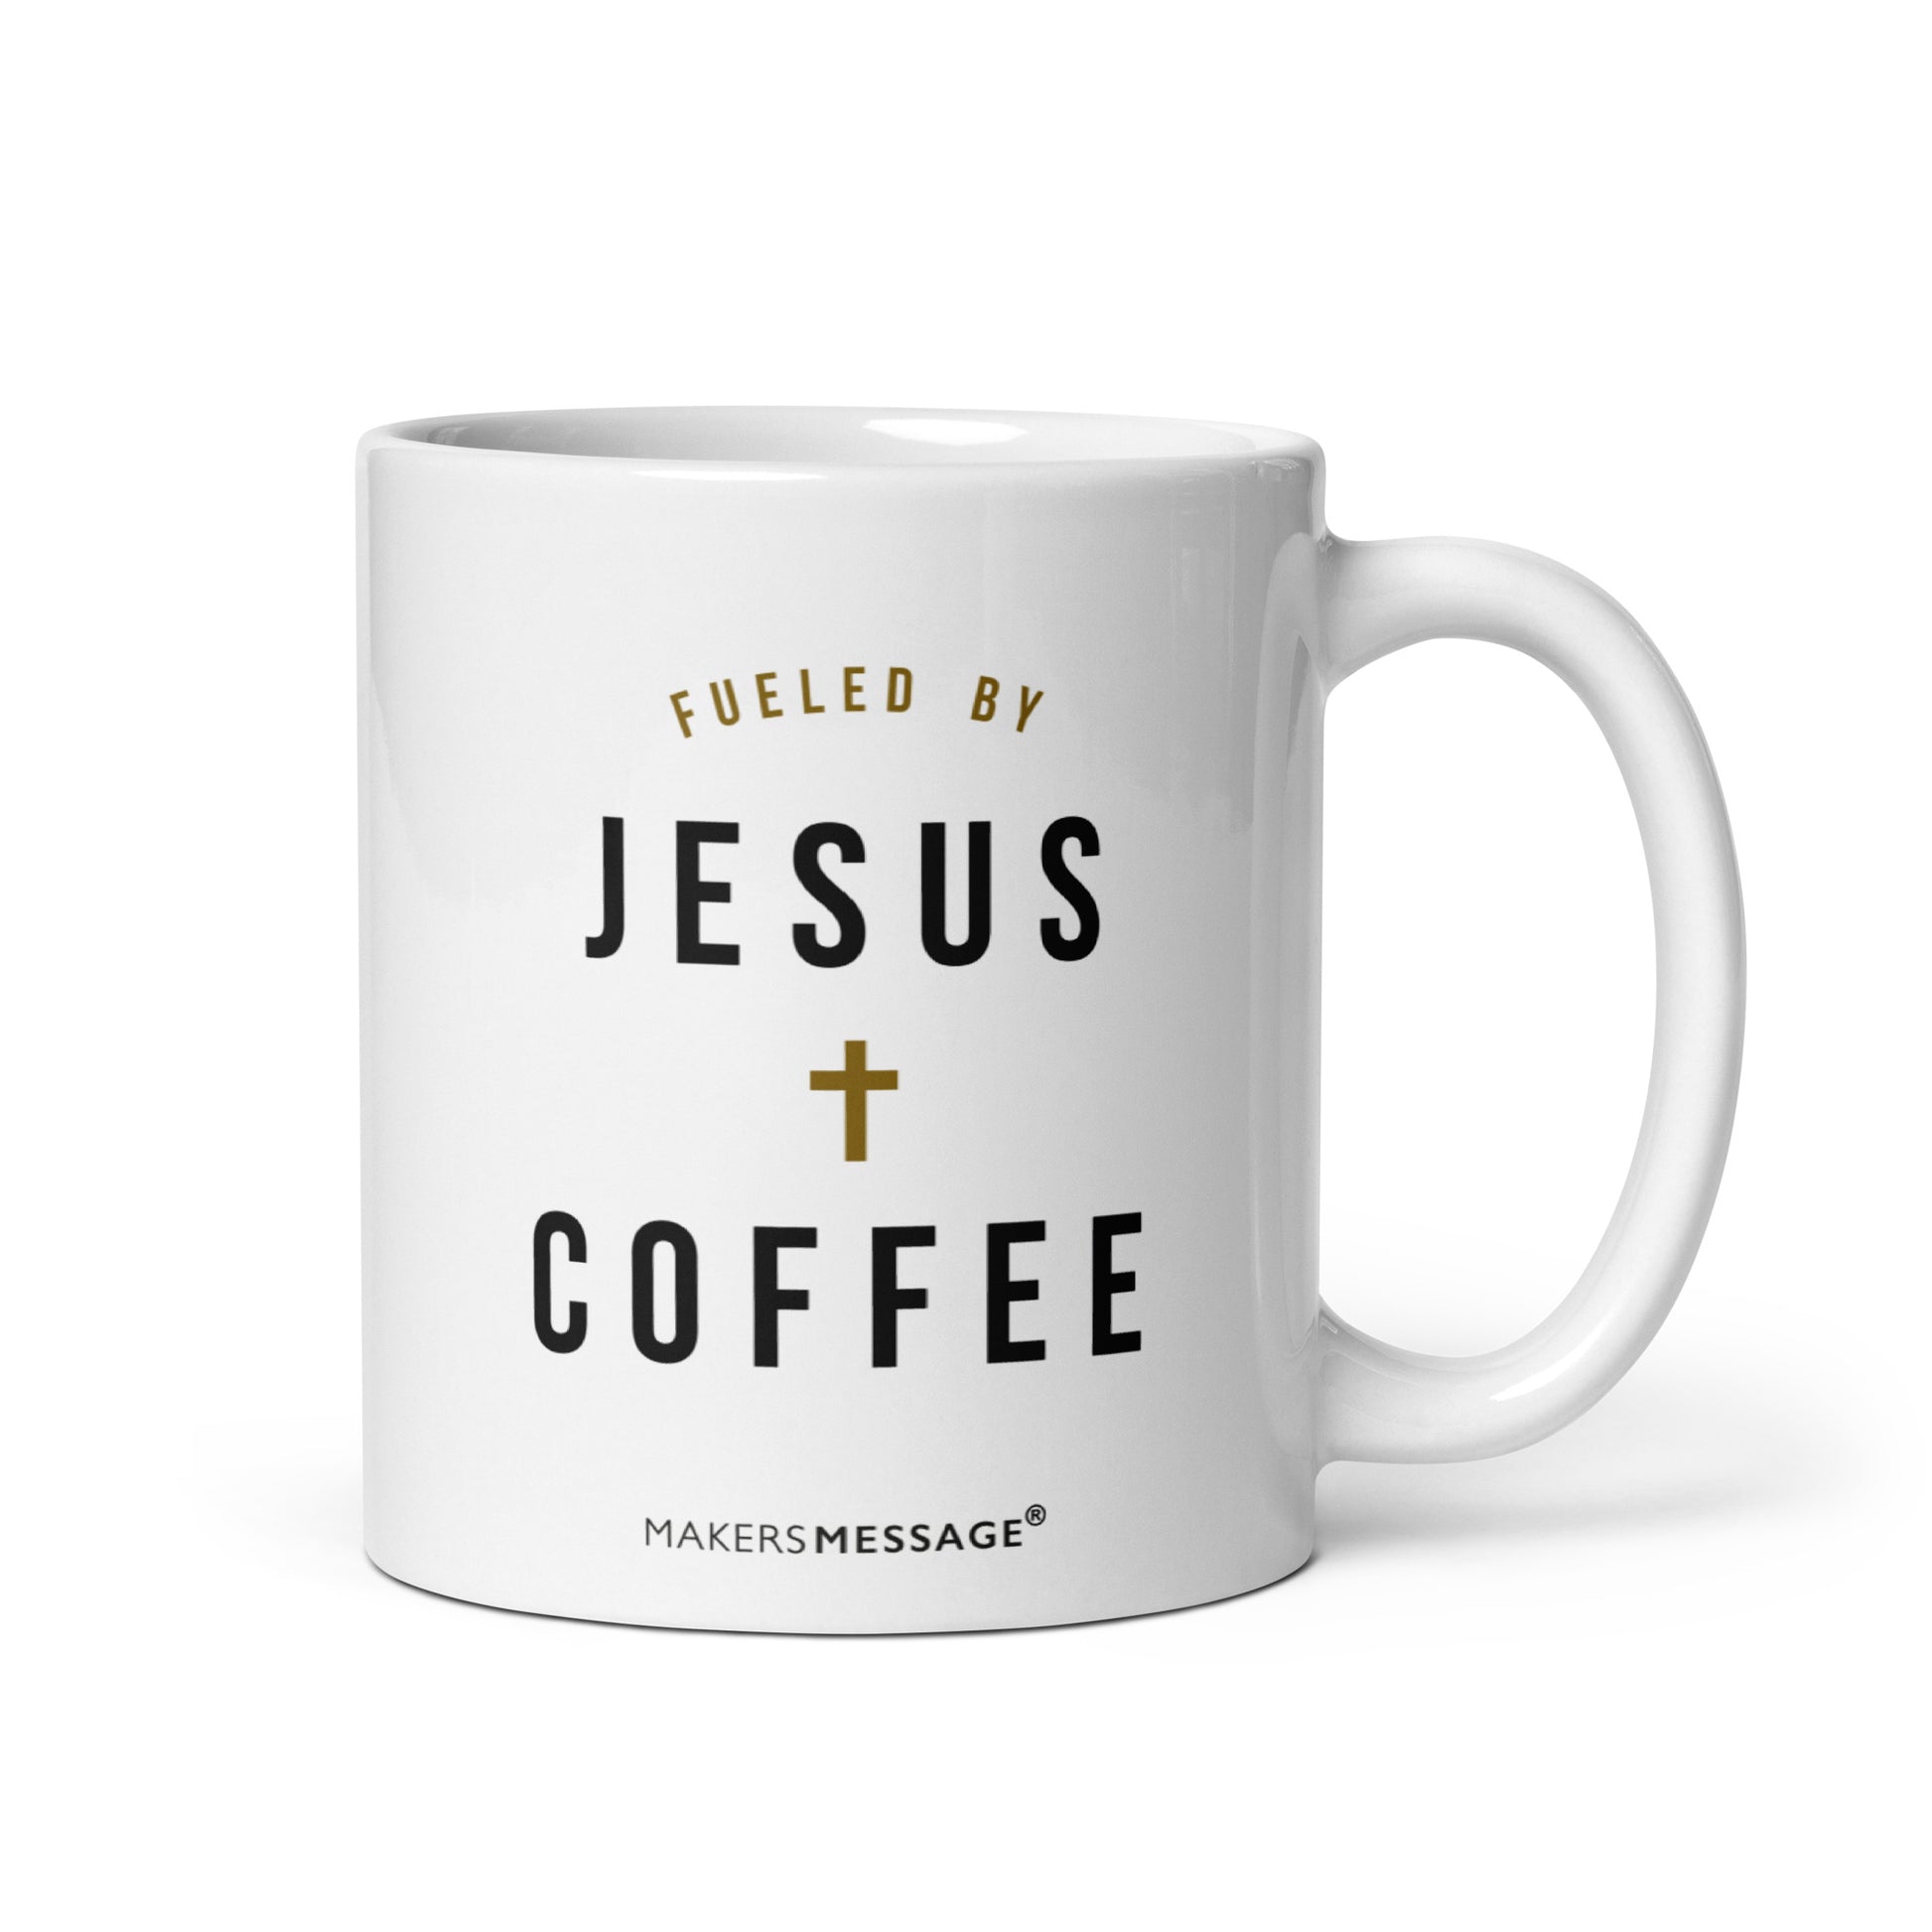 Jesus and Coffee |  MakersMessage